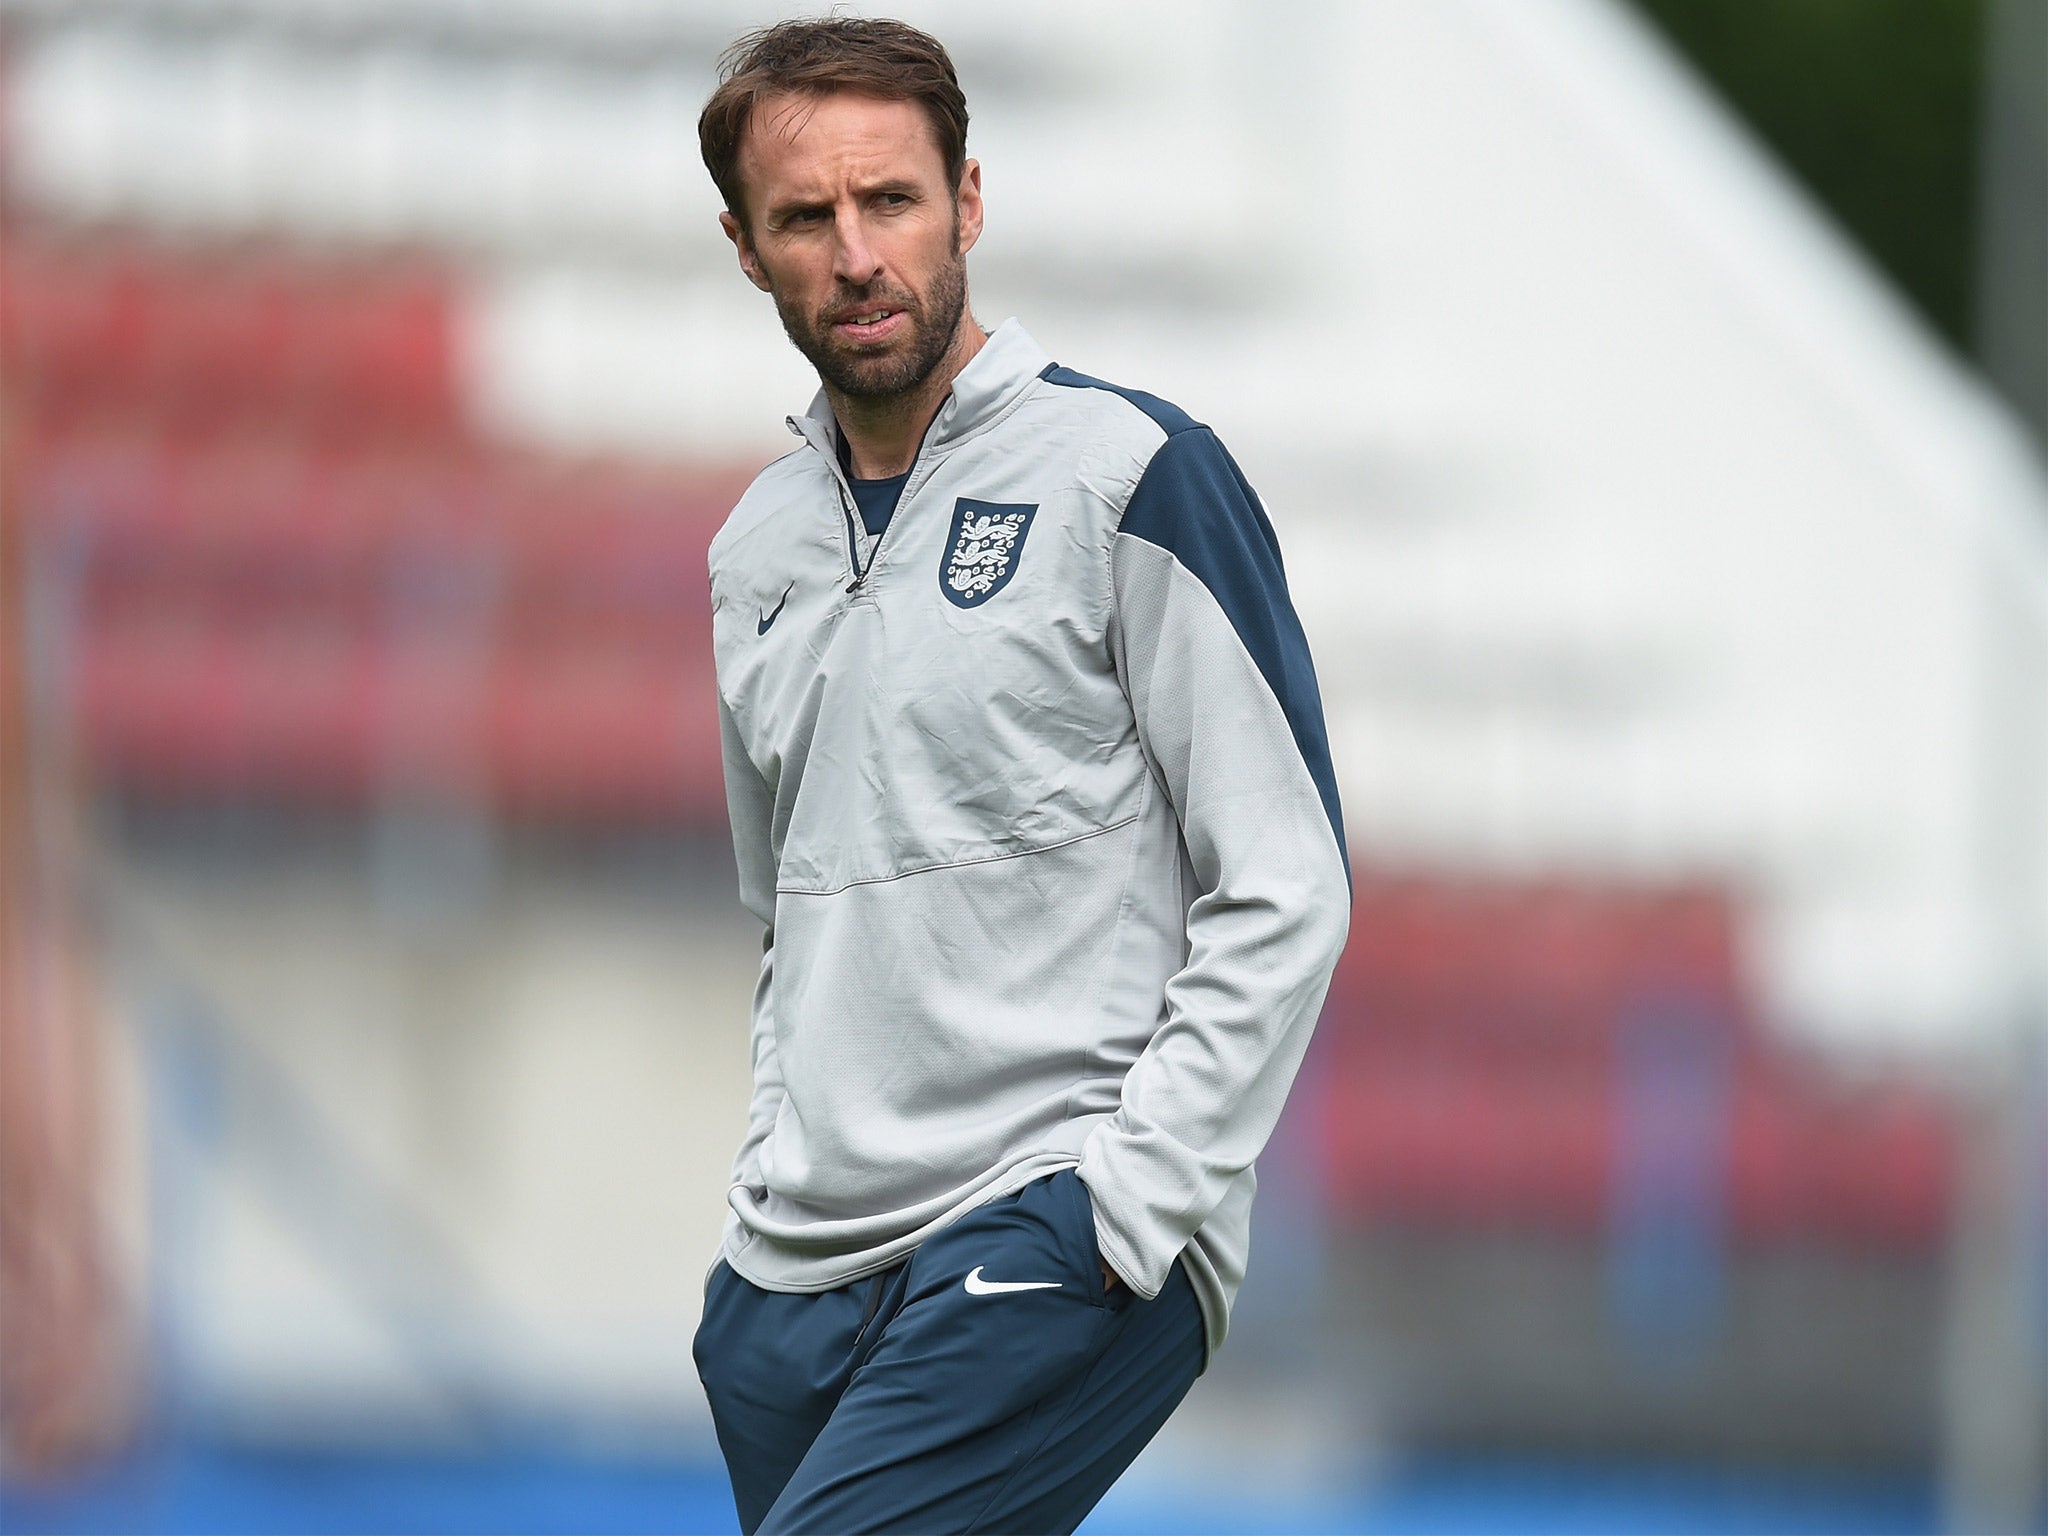 Gareth Southgate could take temporary charge of England